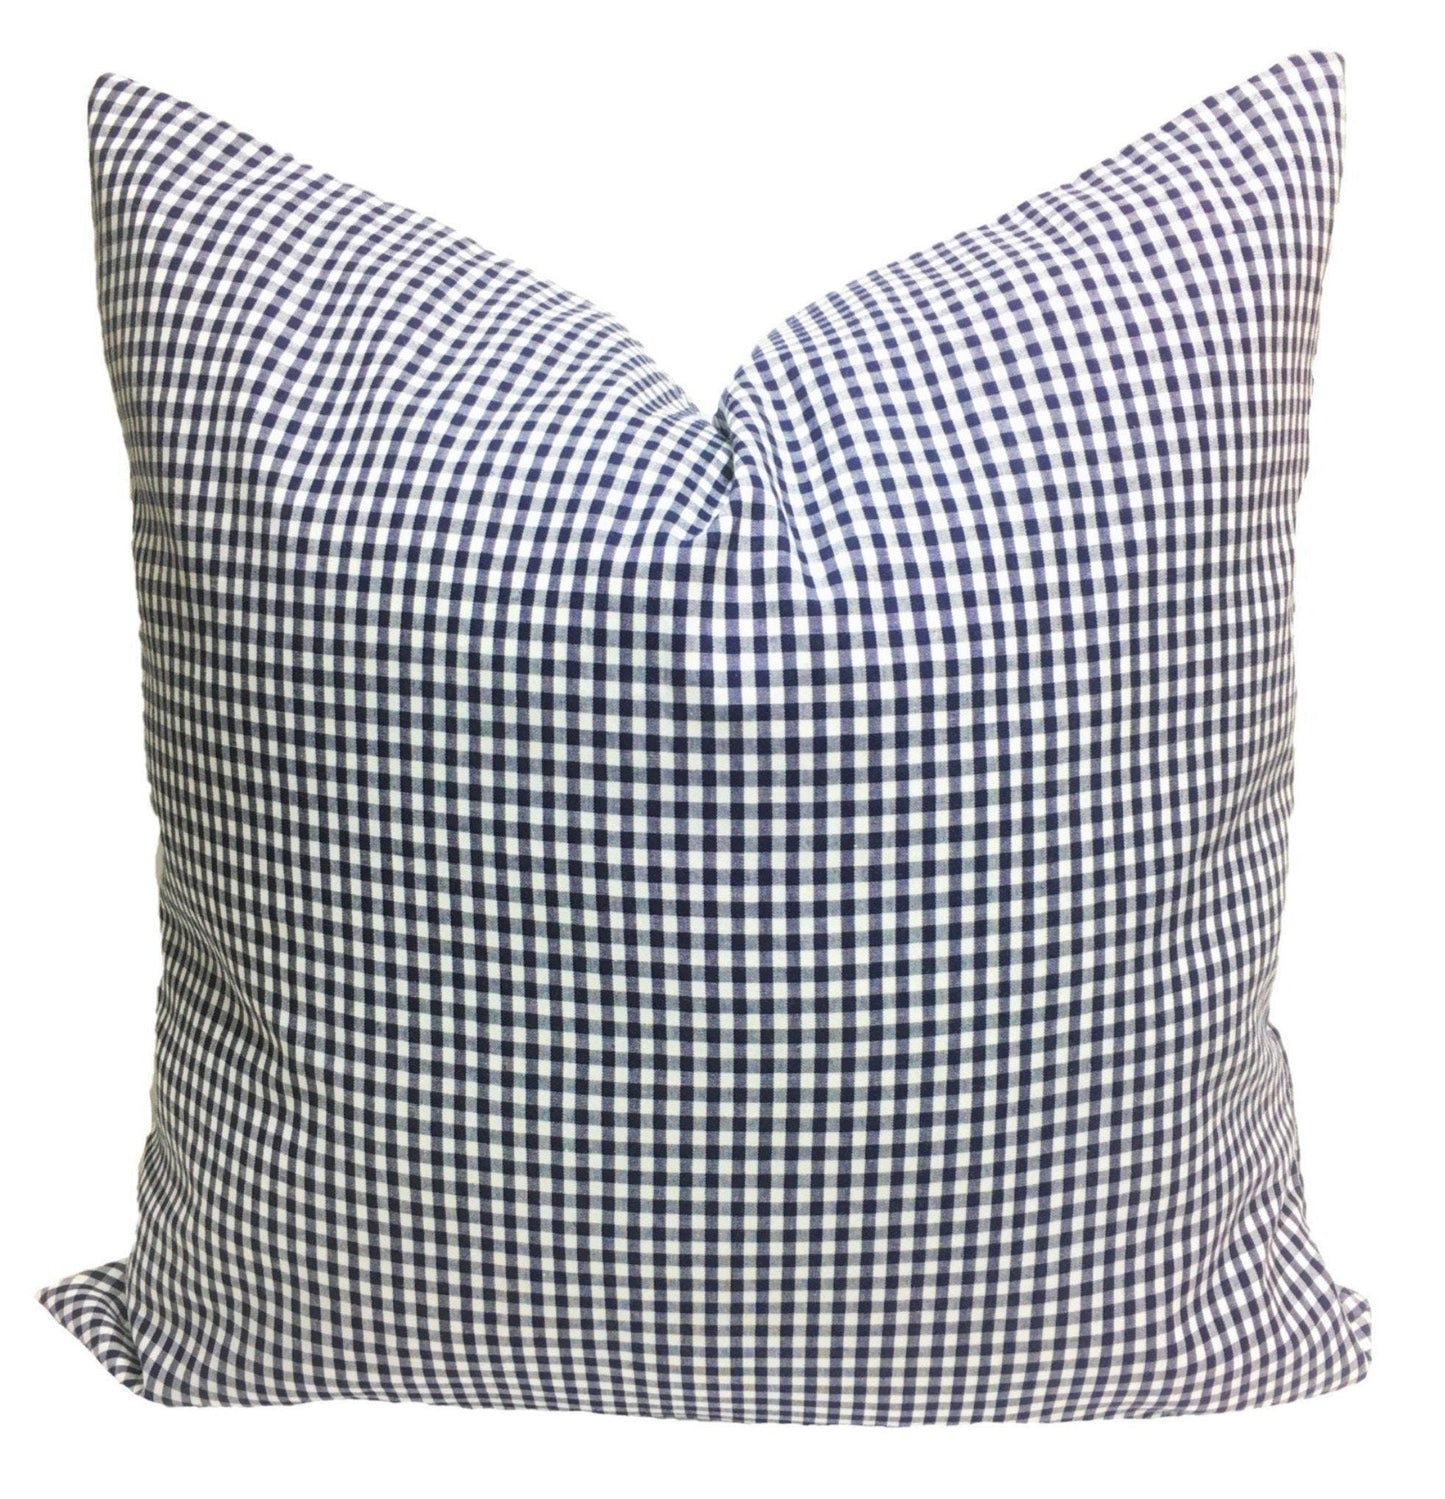 "Tiny Navy Check" | Pillow Cover